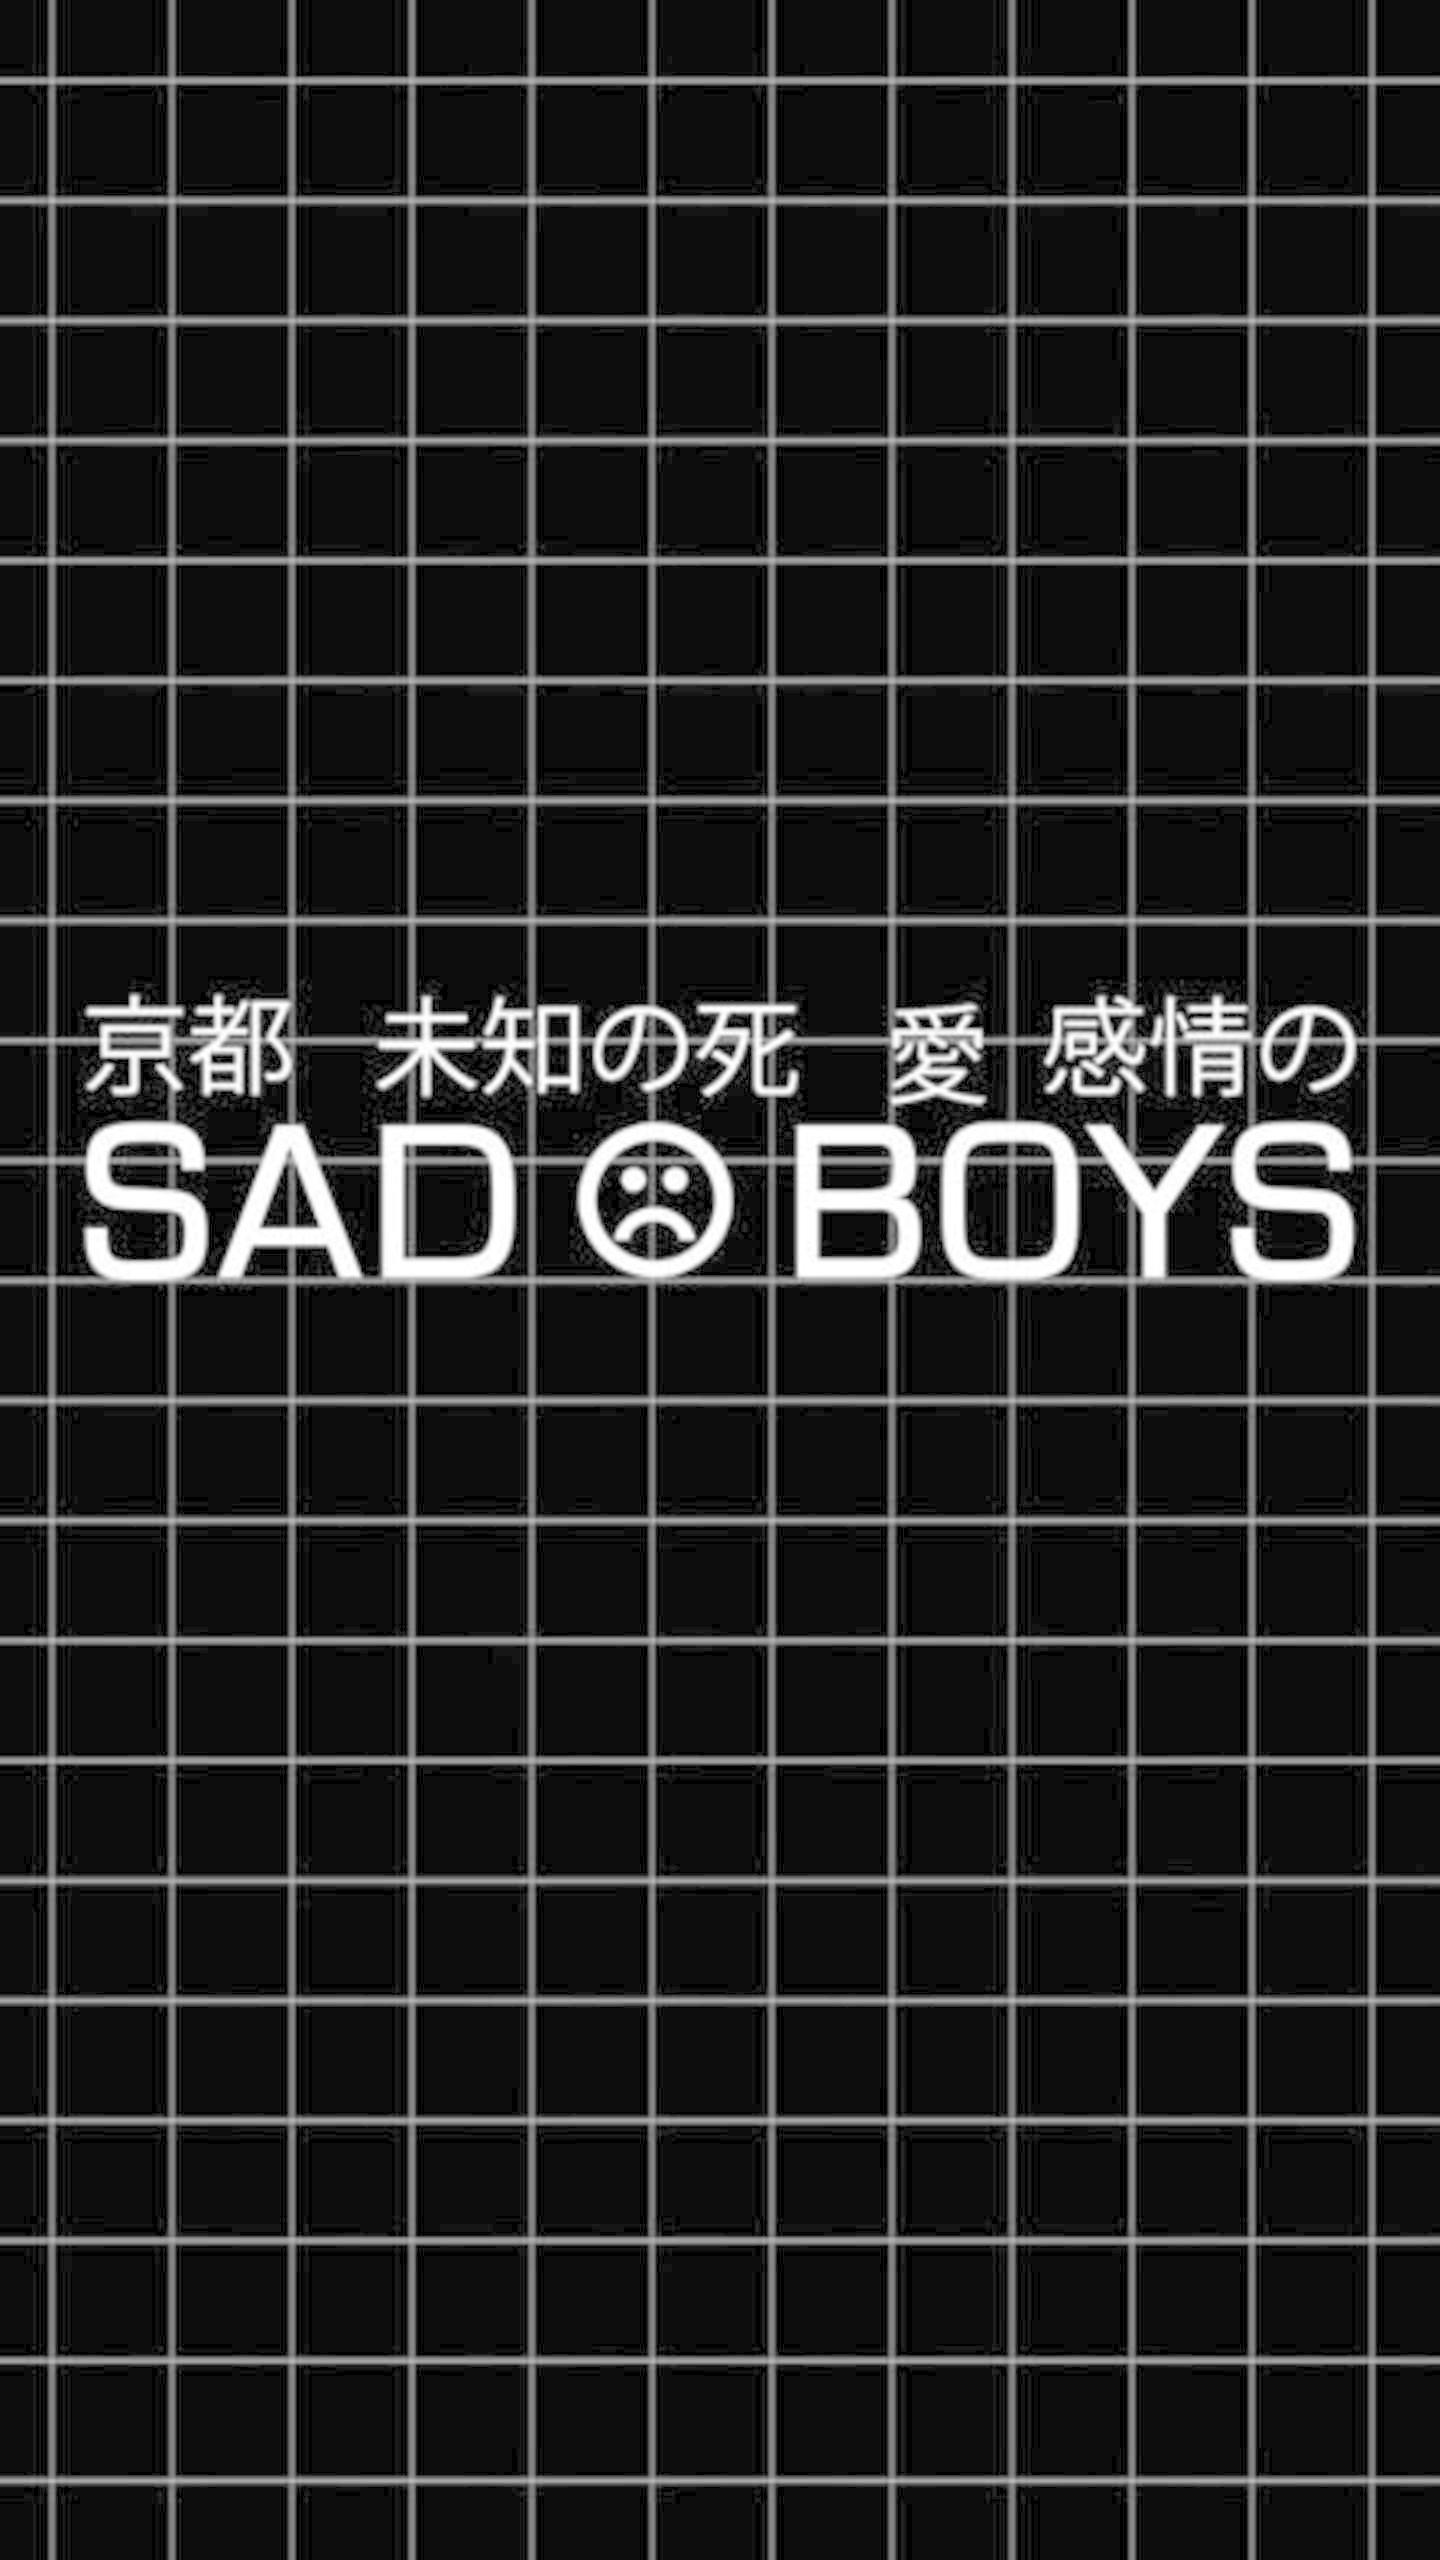 Sad Boy Wallpaper for Android